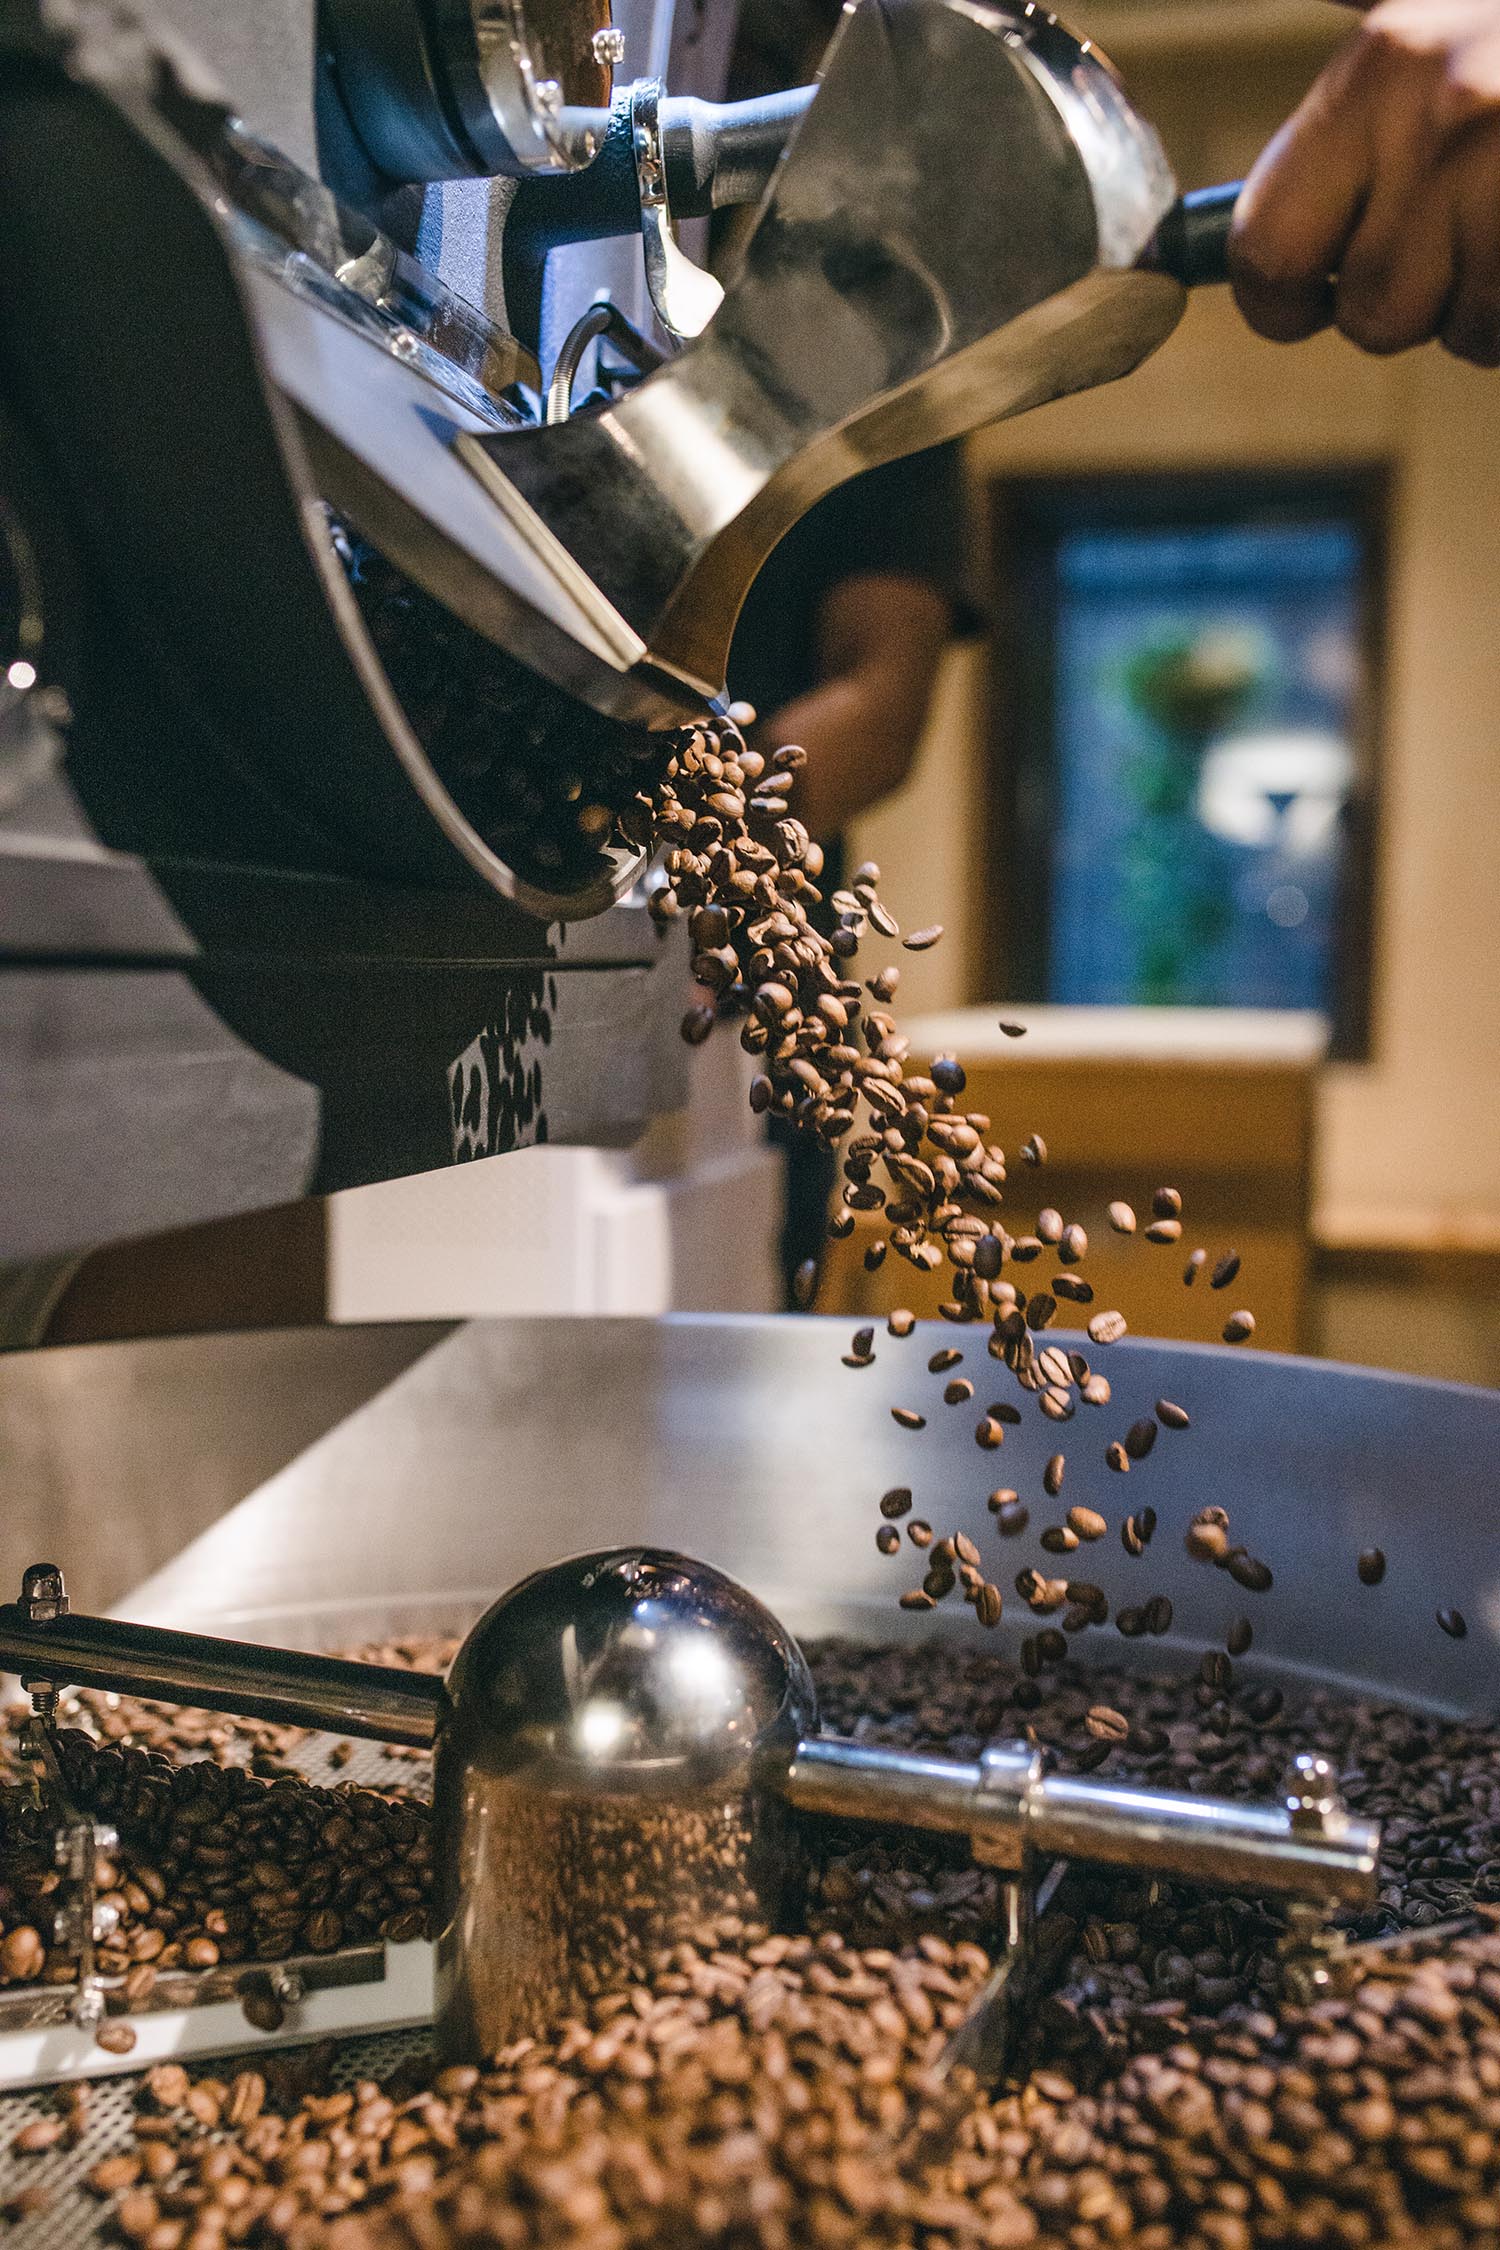 The Process Behind Building A Global Specialty Coffee And Craft Bakes Brand Out Of South Asia